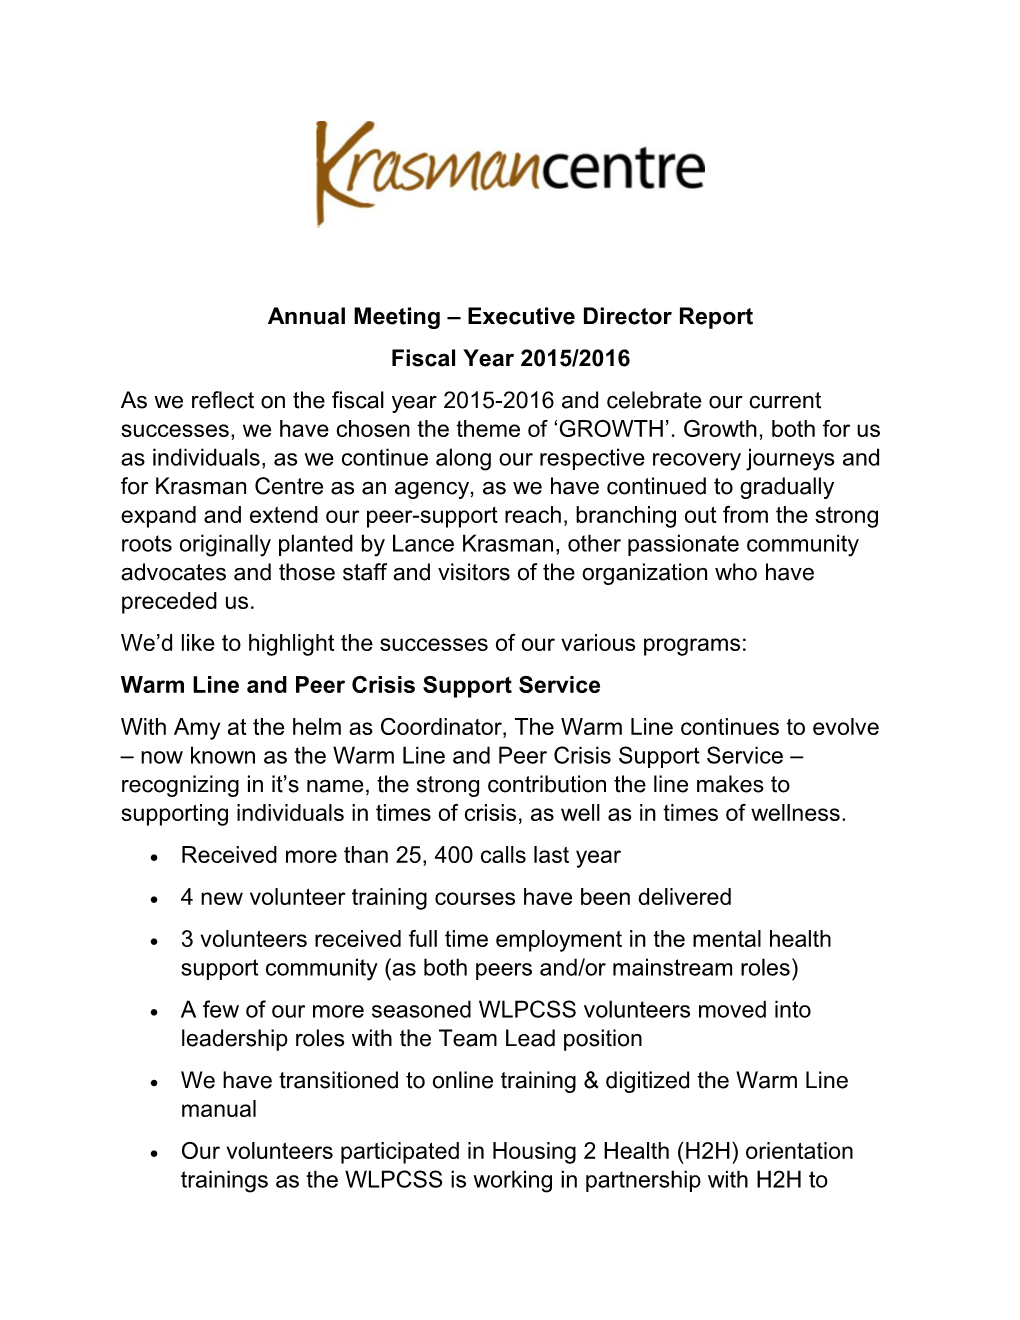 Annual Meeting Executive Director Report